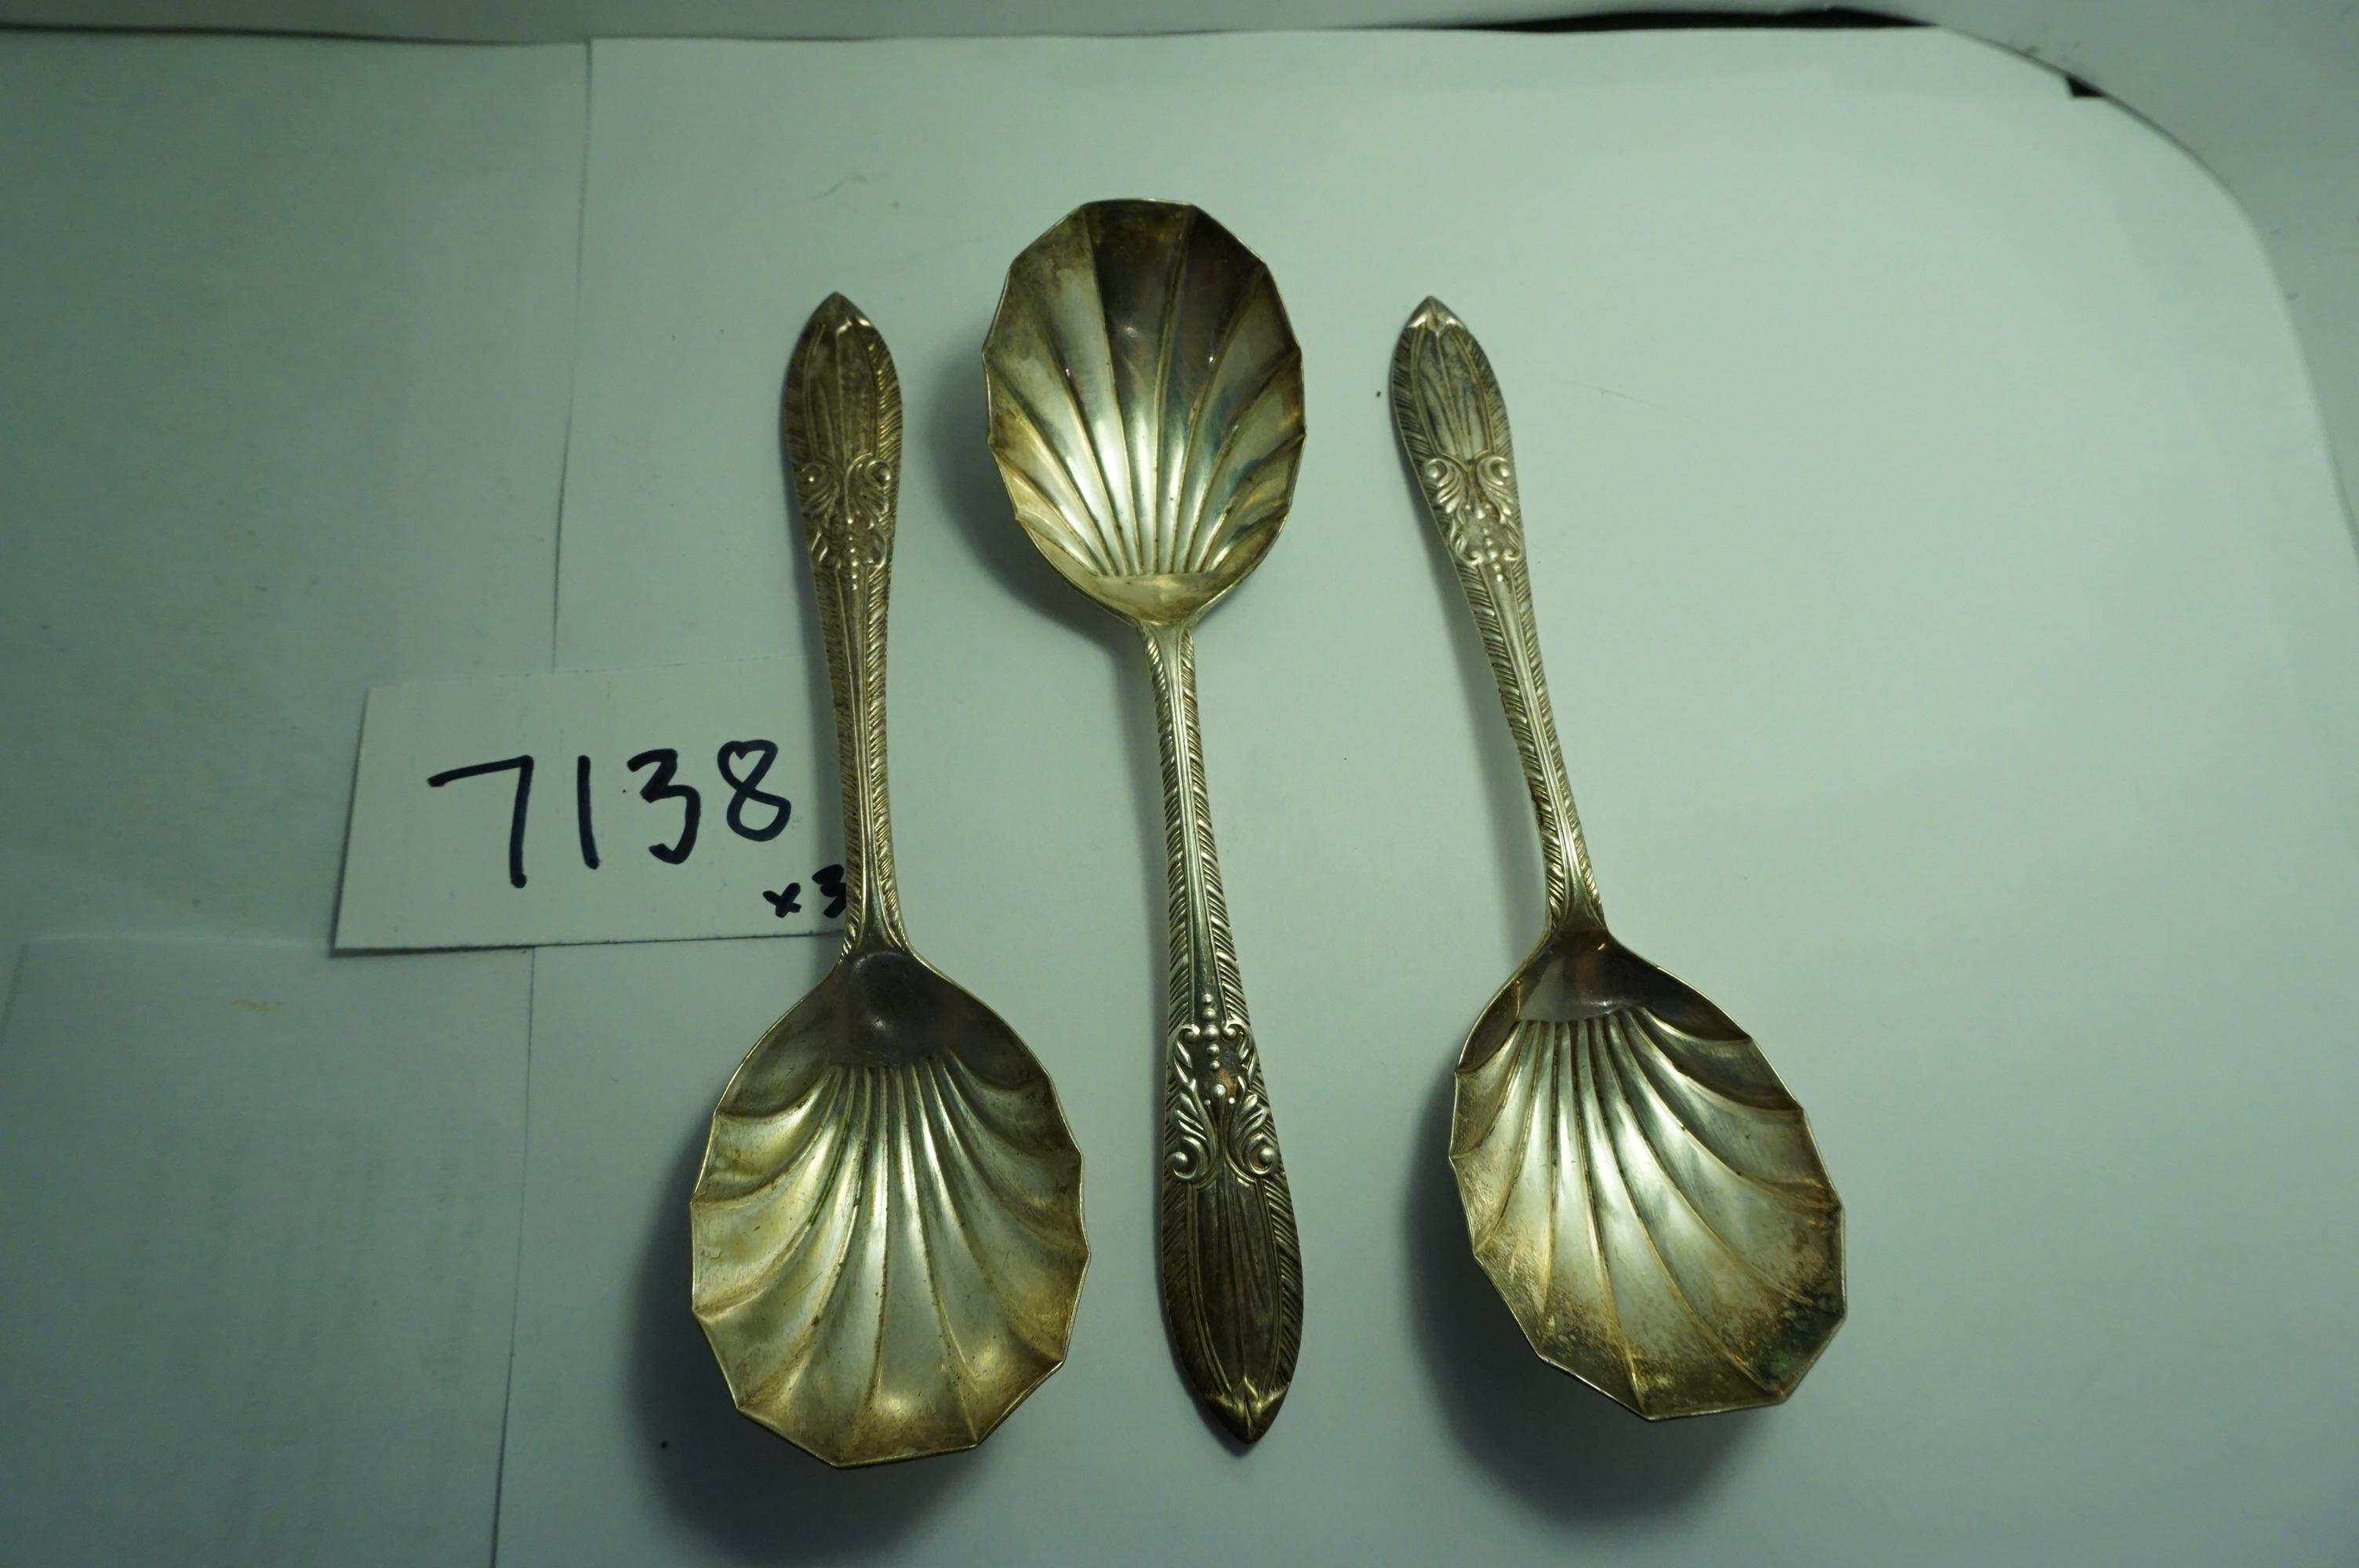 Three (3) X The Money" Yeoman Plate, Made in England, Nicely Detaled 5.5" Spoons, Estate Find.